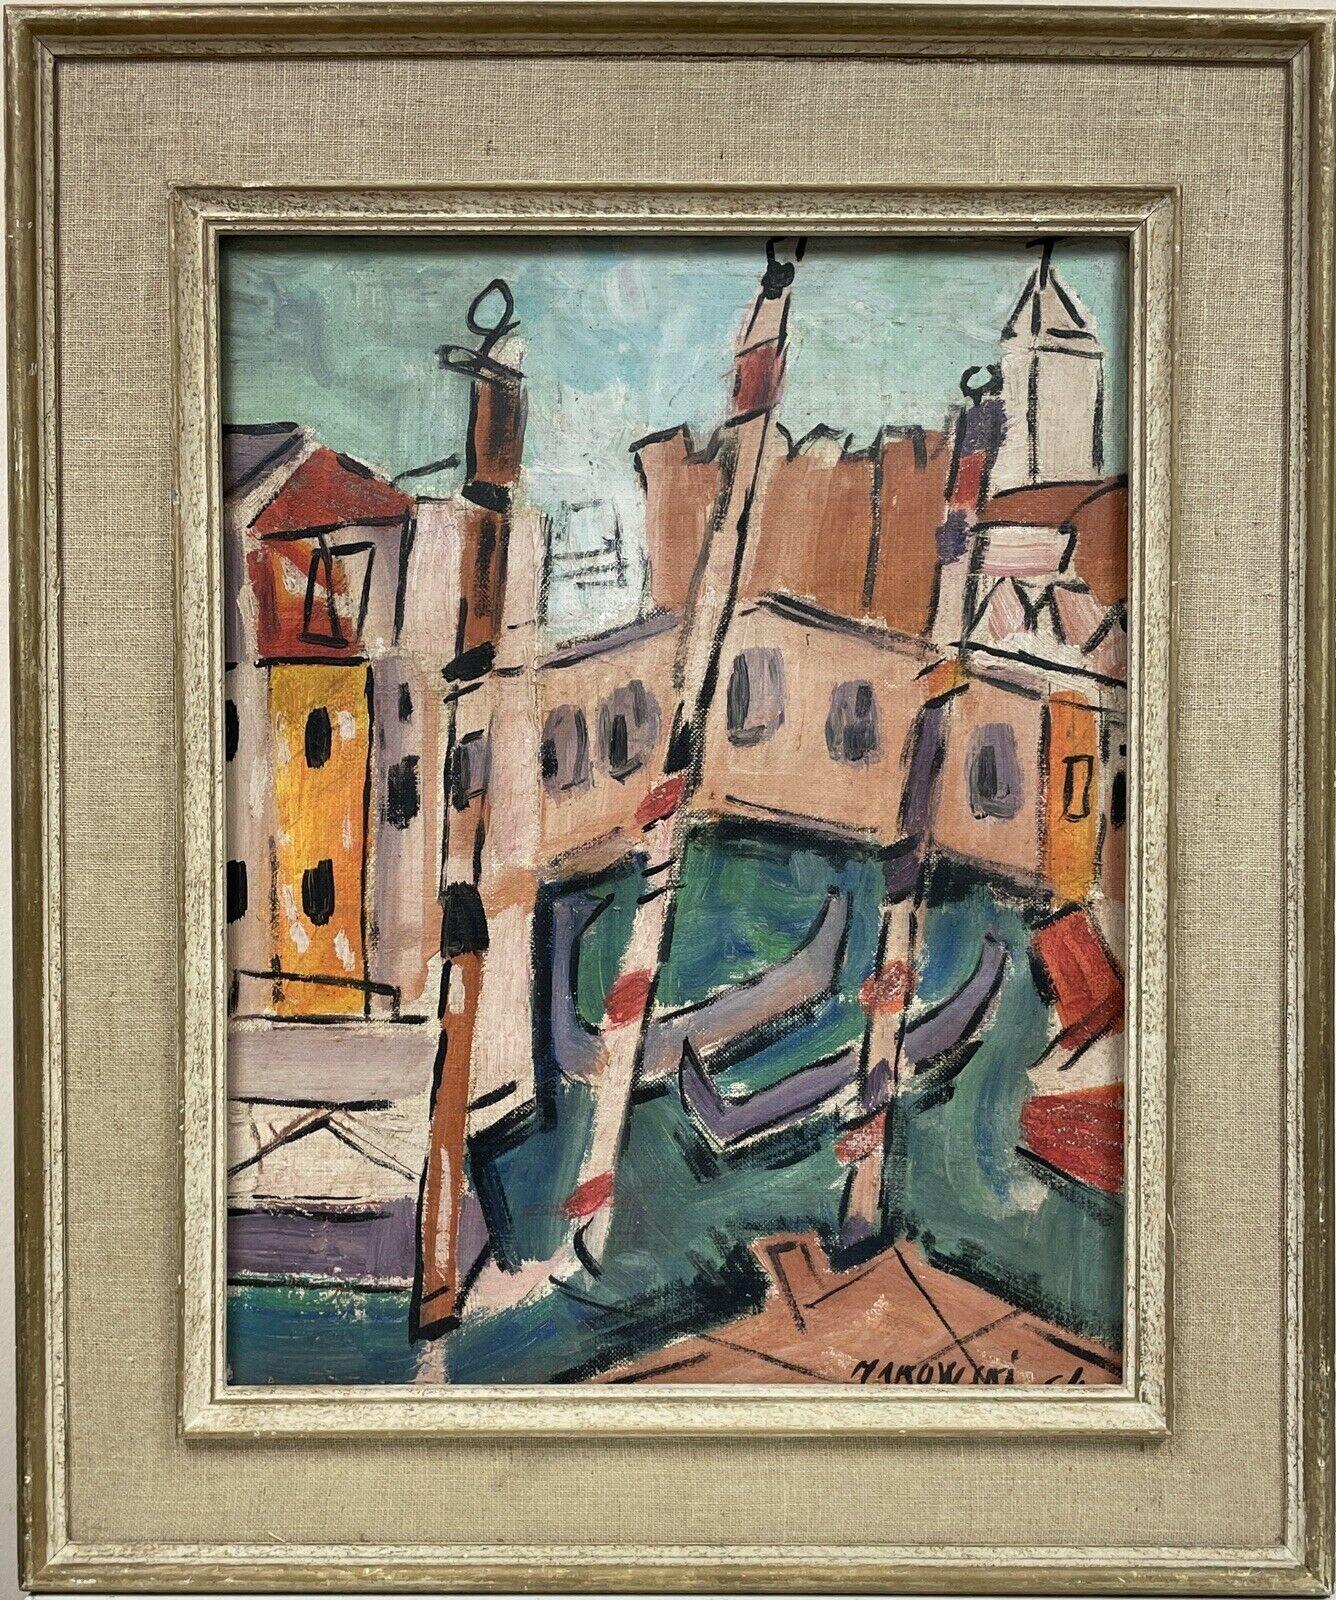 European School Landscape Painting - Mid 20th Century Fauvist Modernist Oil - Venice Backwater Canal - Signed & Dated